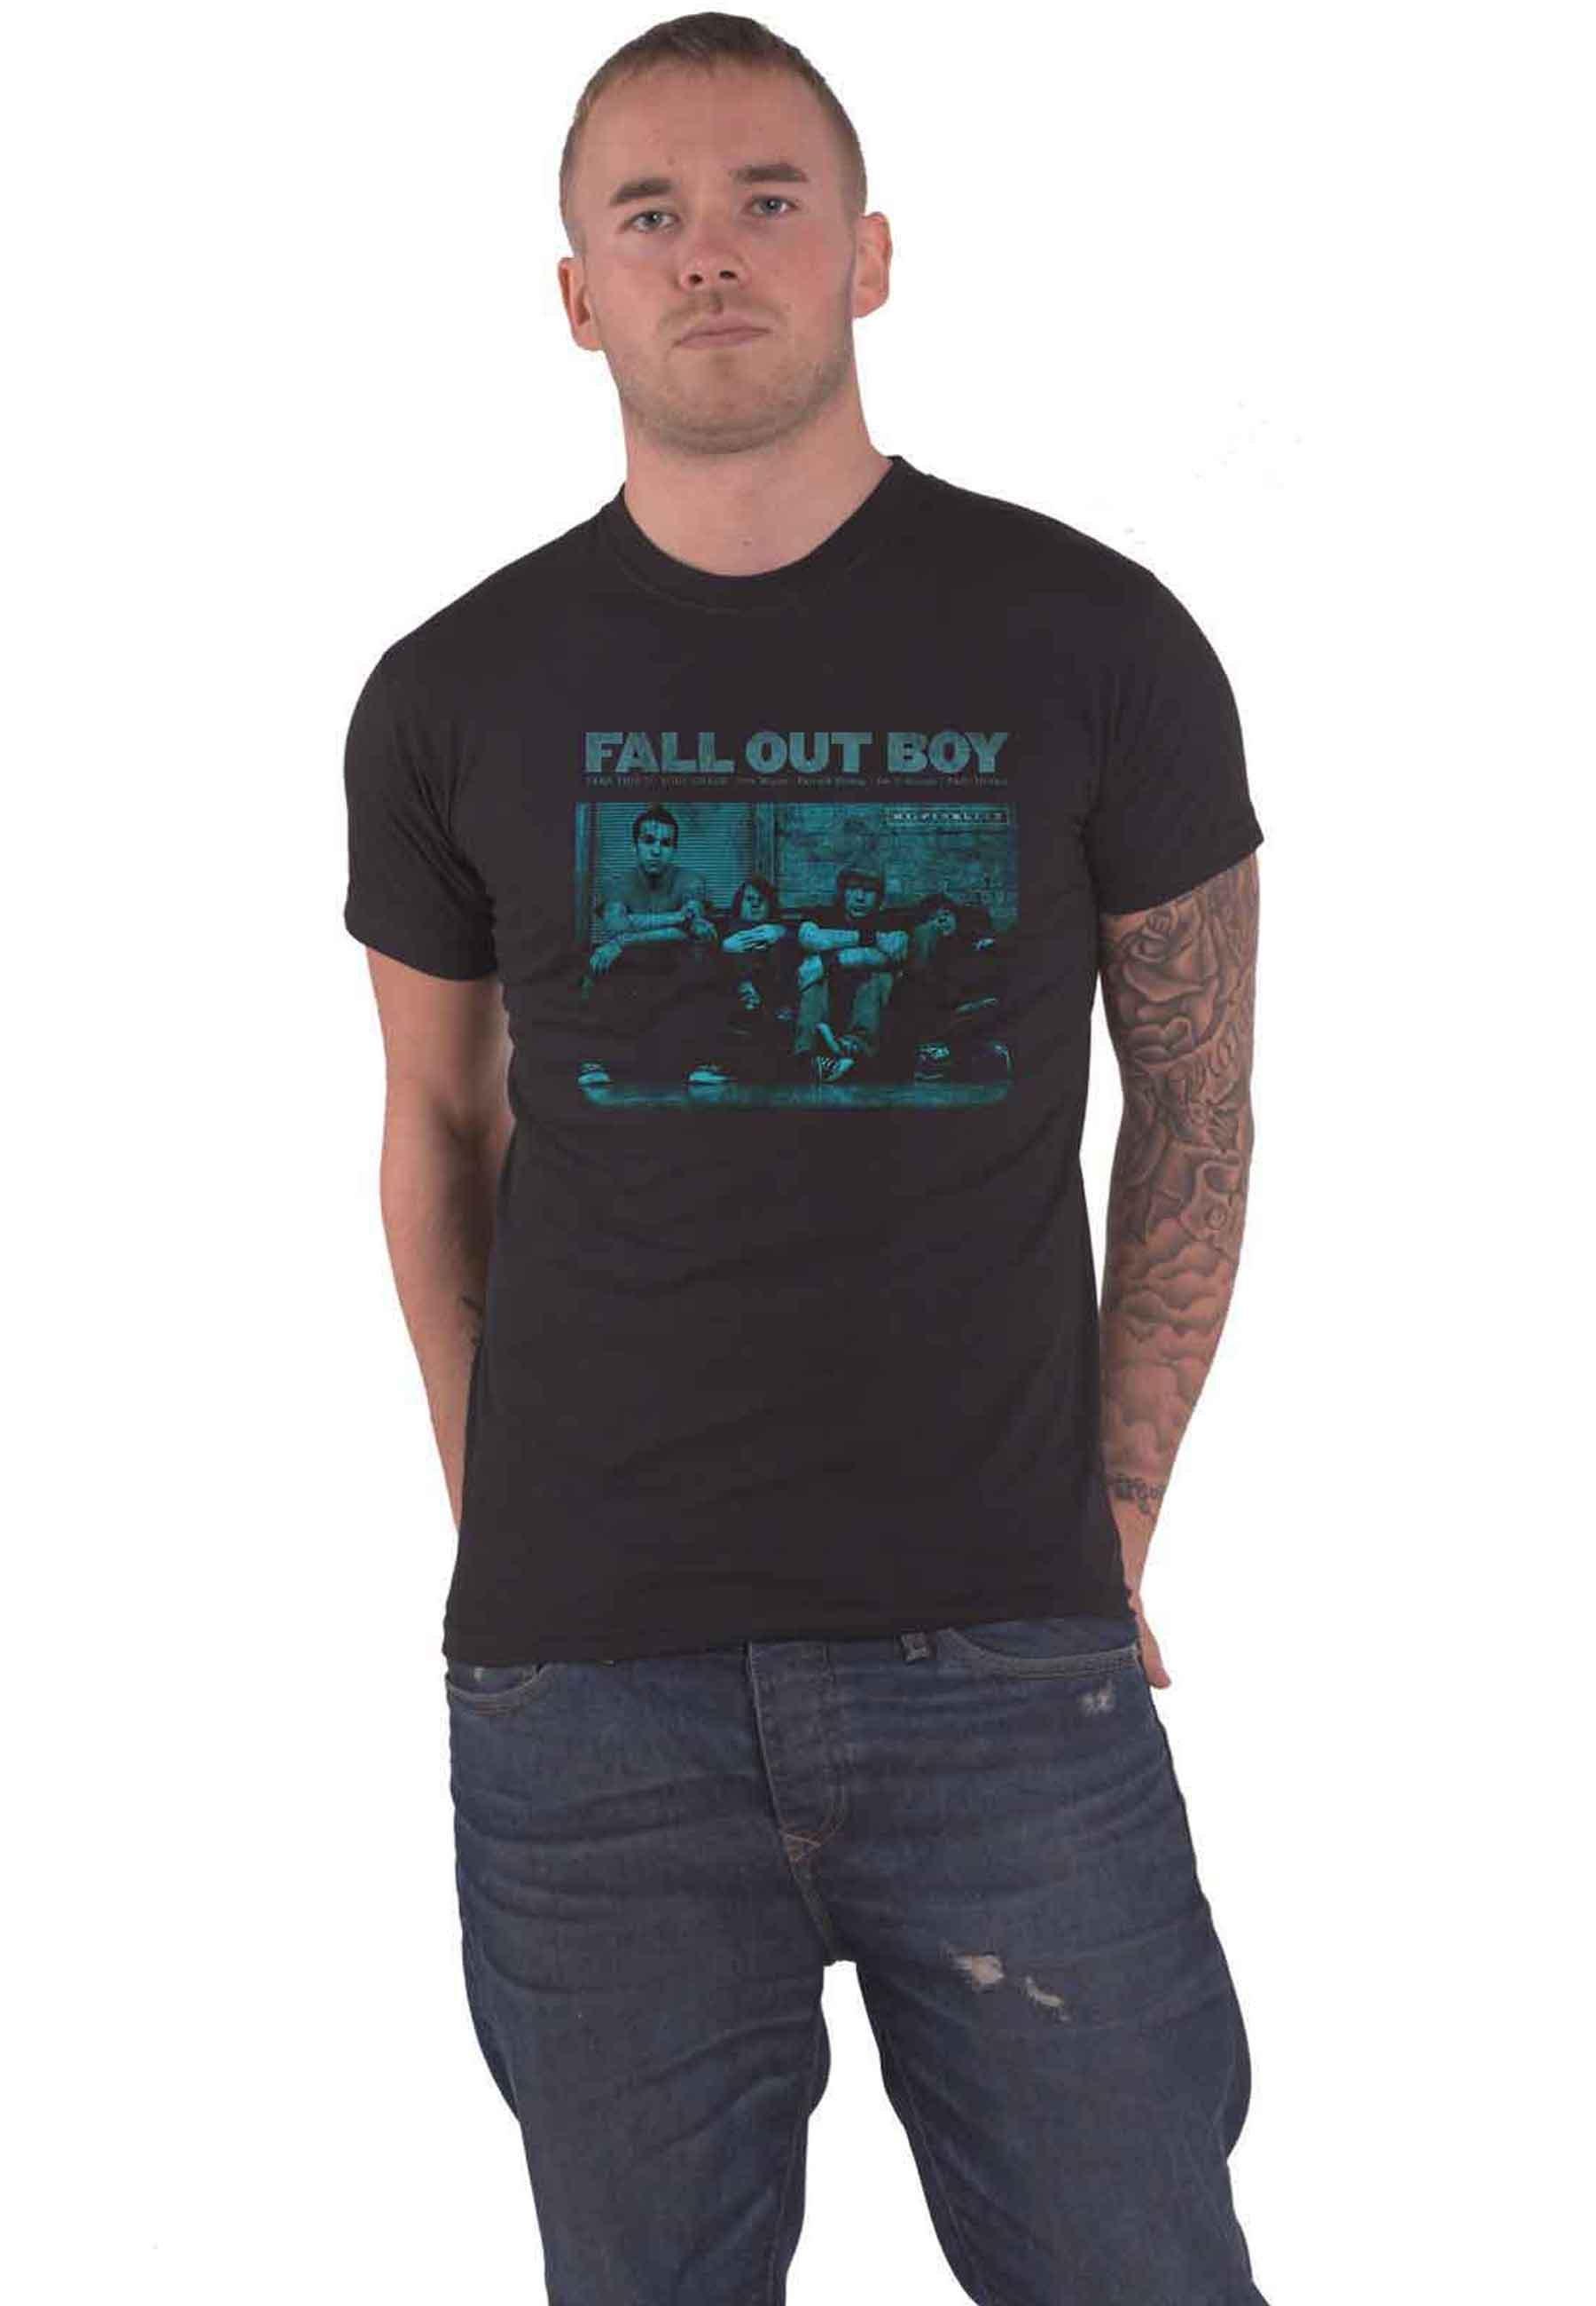 fall out boy fall out boy take this to your grave limited colour Футболка «Отнеси это в могилу» Fall Out Boy, черный